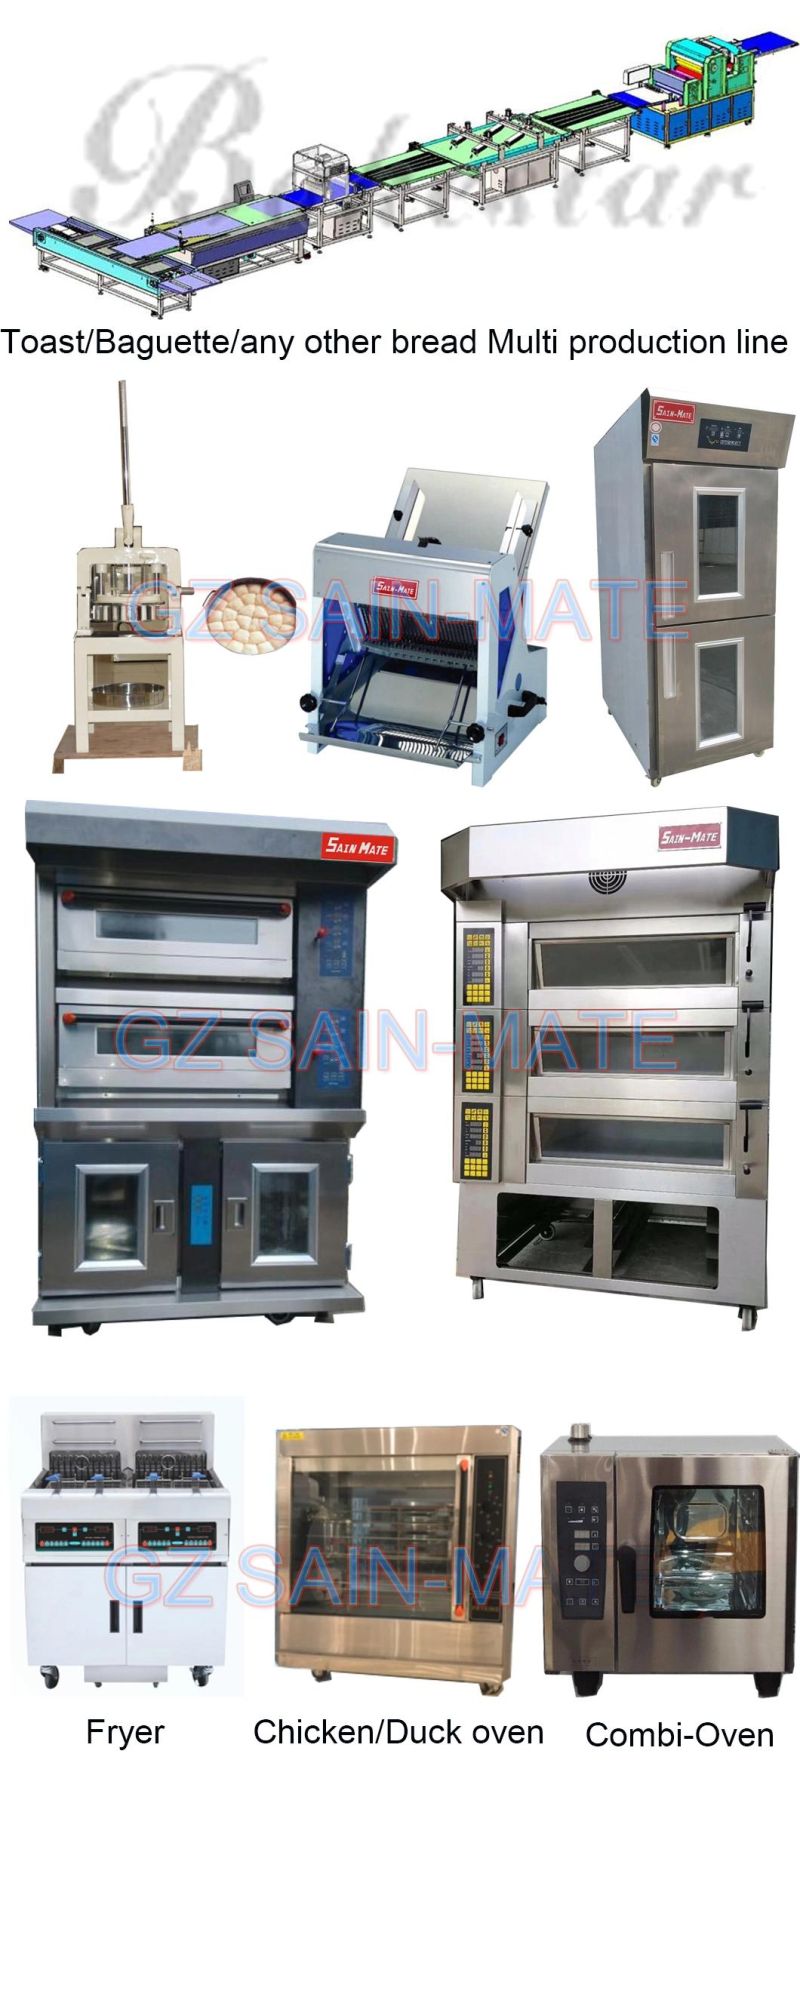 64 Trays Comercial Electric Rotary Rack Oven for Bakery Equipment with Trolley